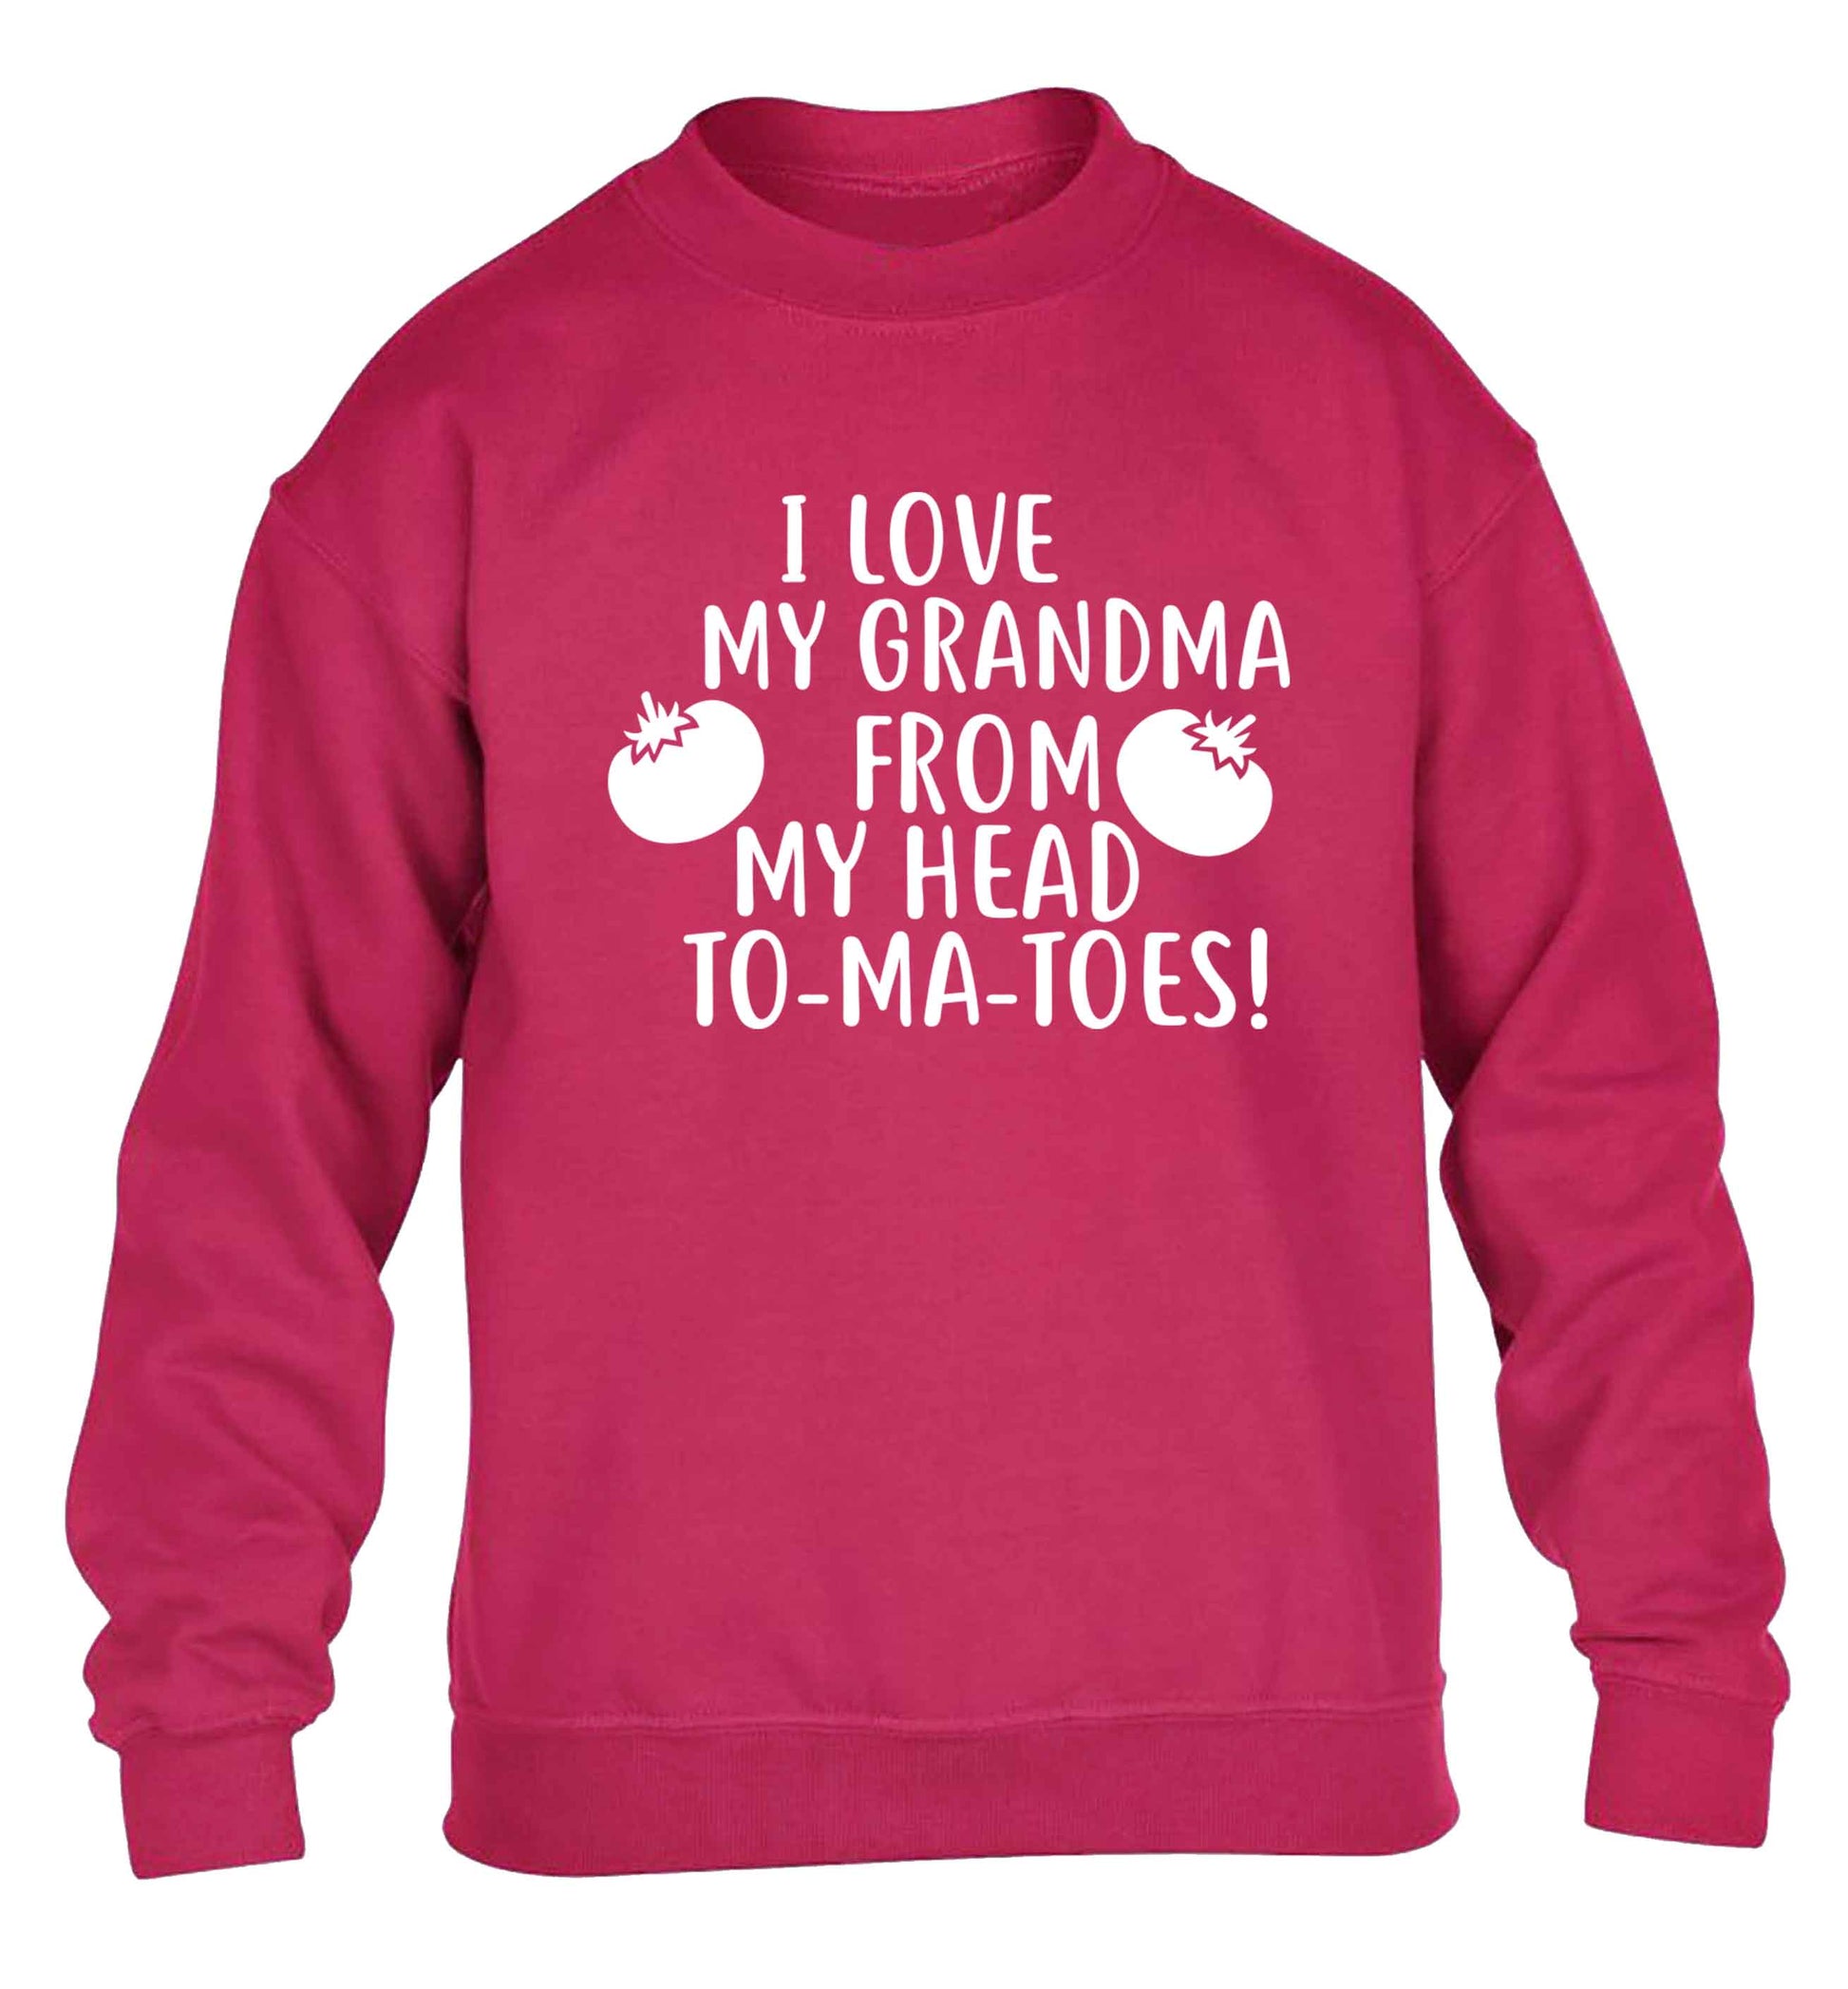 I love my grandma from my head to-ma-toes children's pink sweater 12-13 Years